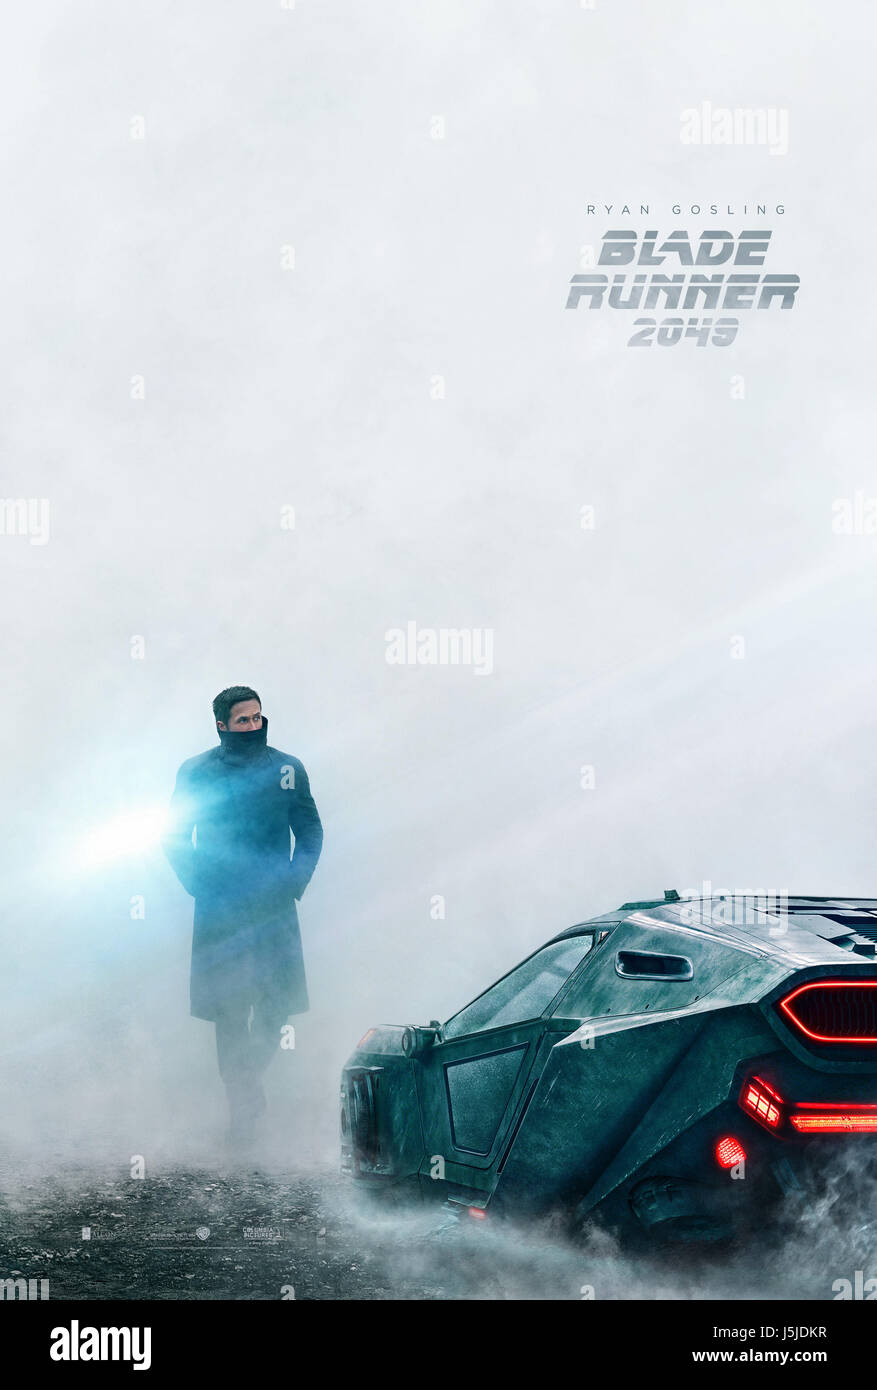 LEASE DATE: October 6, 2017 TITLE: Blade Runner 2049 STUDIO: Columbia Pictures DIRECTOR: Denis Villeneuve PLOT: Thirty years after the events of the first film, a new blade runner, LAPD Officer K (Ryan Gosling), unearths a long-buried secret that has the potential to plunge what's left of society into chaos. K's discovery leads him on a quest to find Rick Deckard (Harrison Ford), a former LAPD blade runner who has been missing for 30 years STARRING: Ryan Gosling Poster Art. (Credit: © Columbia Pictures/Entertainment Pictures) Stock Photo